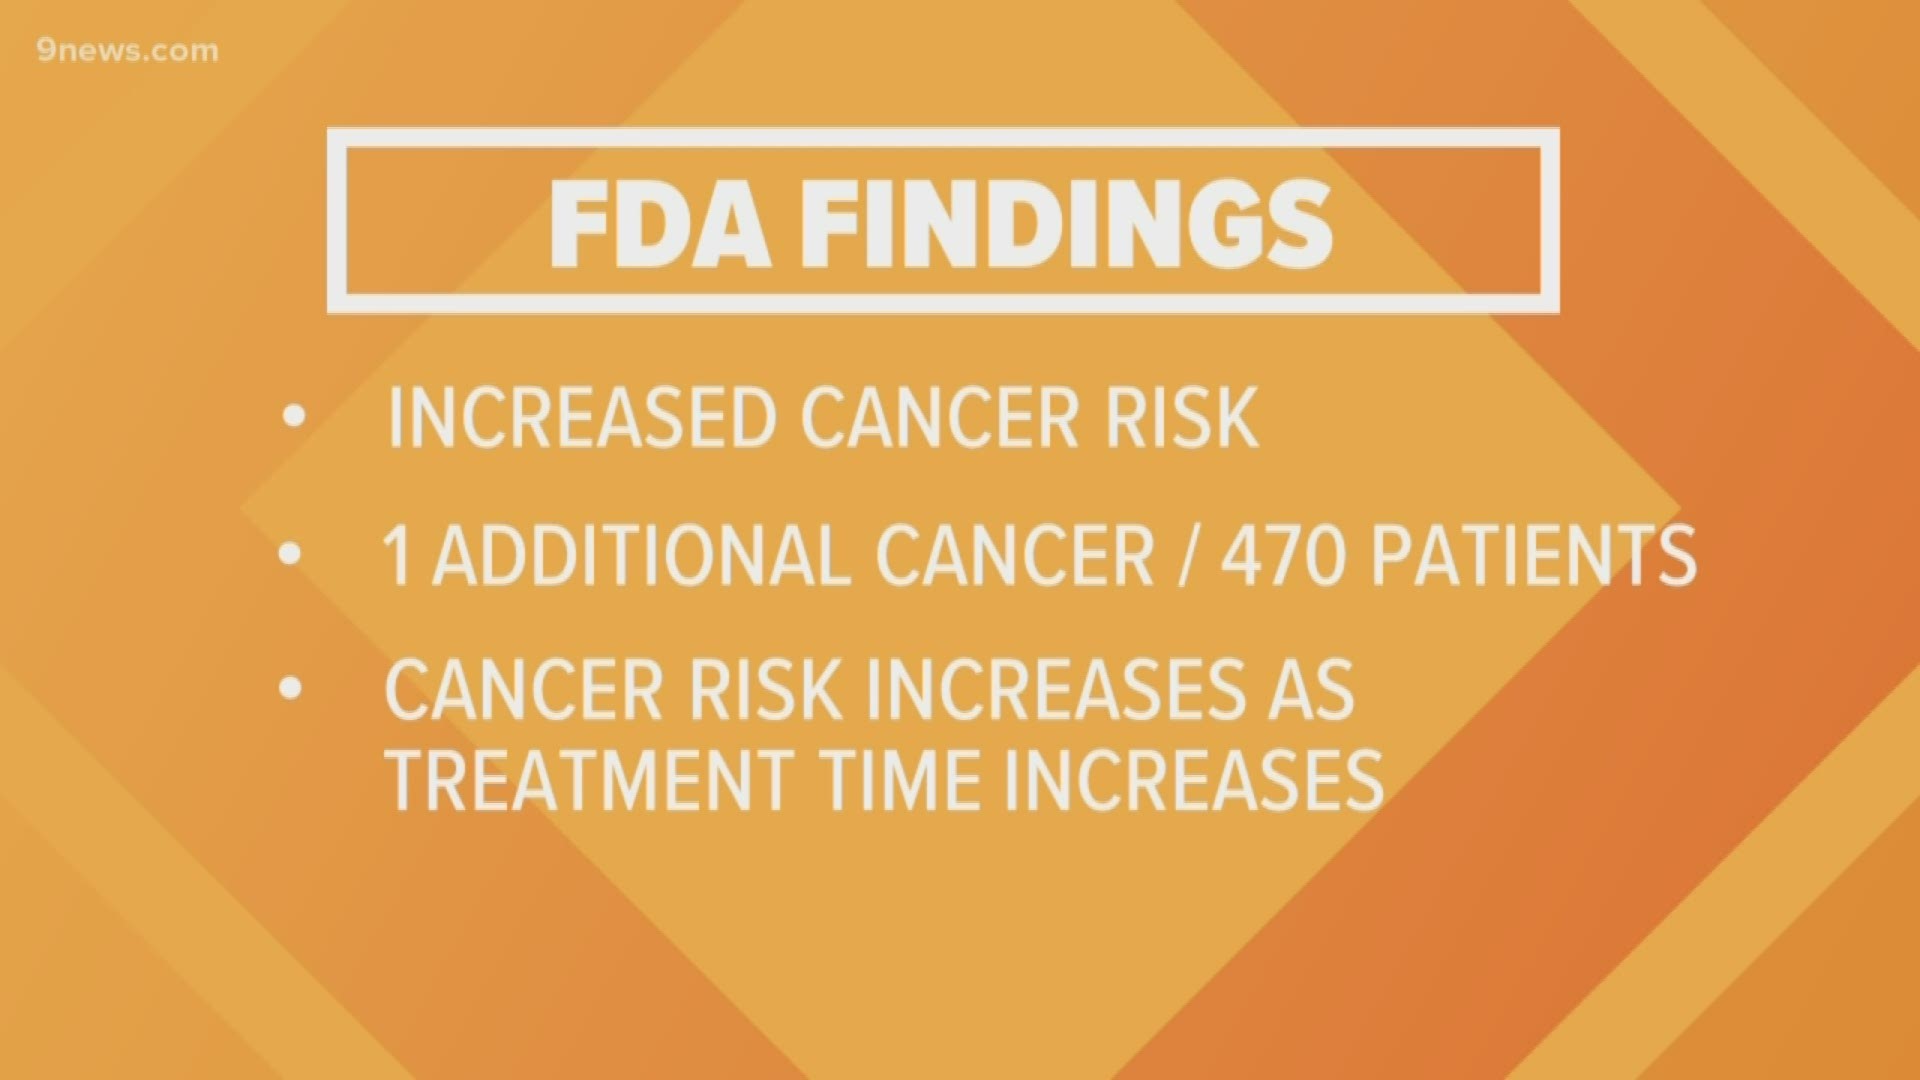 The FDA is asking that Beliviq be withdrawn from the market immediately due to concern about an increased risk of a range of cancers.